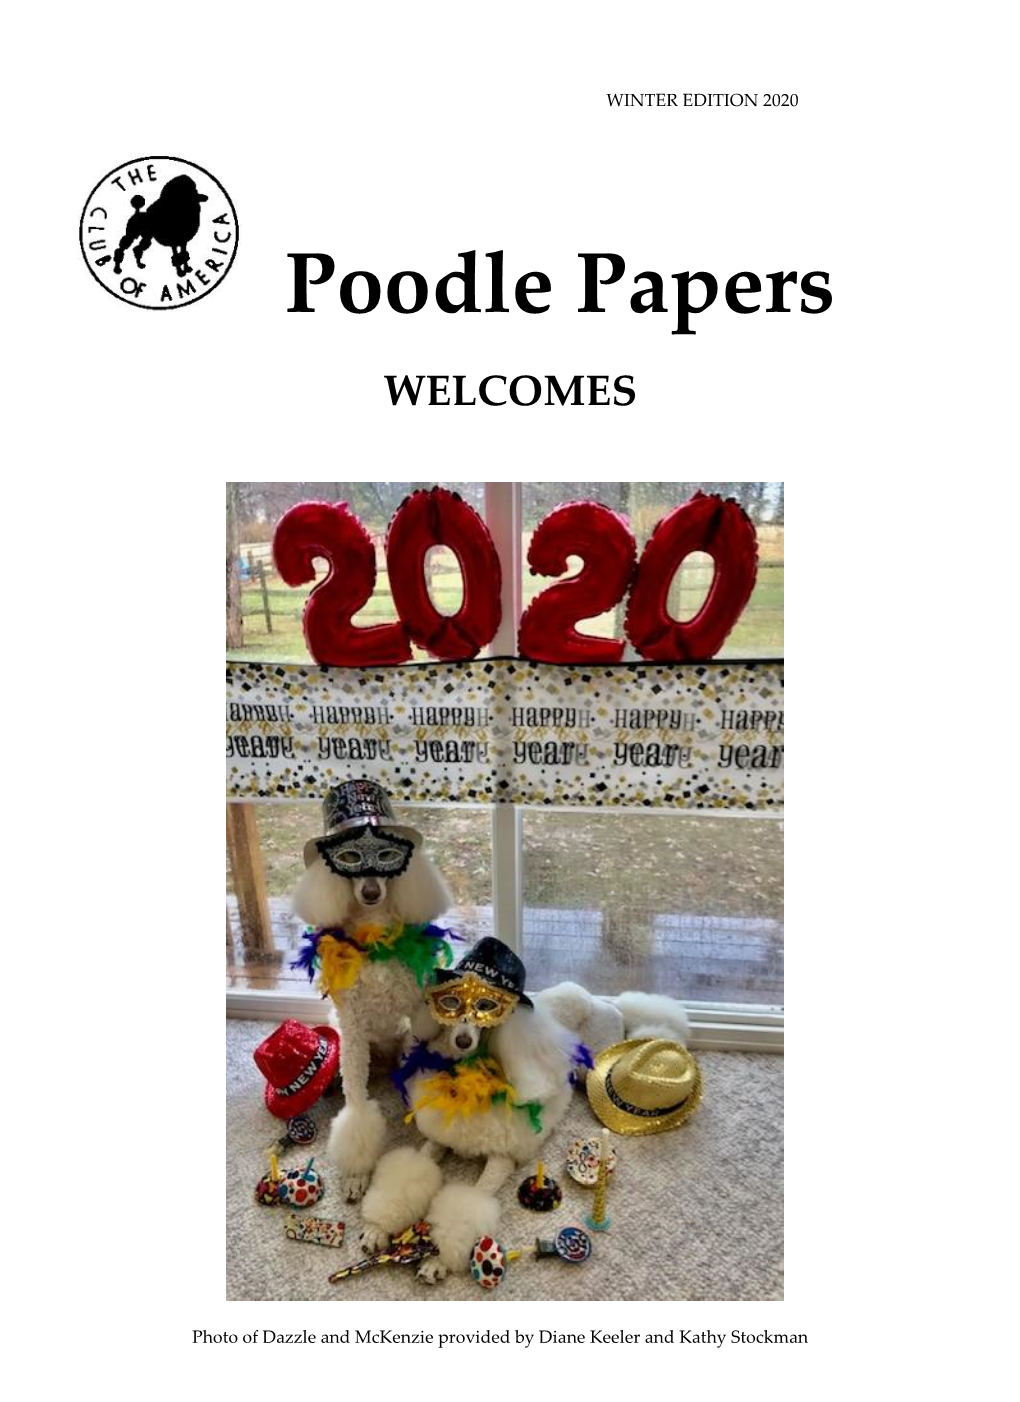 Poodle Papers WELCOMES